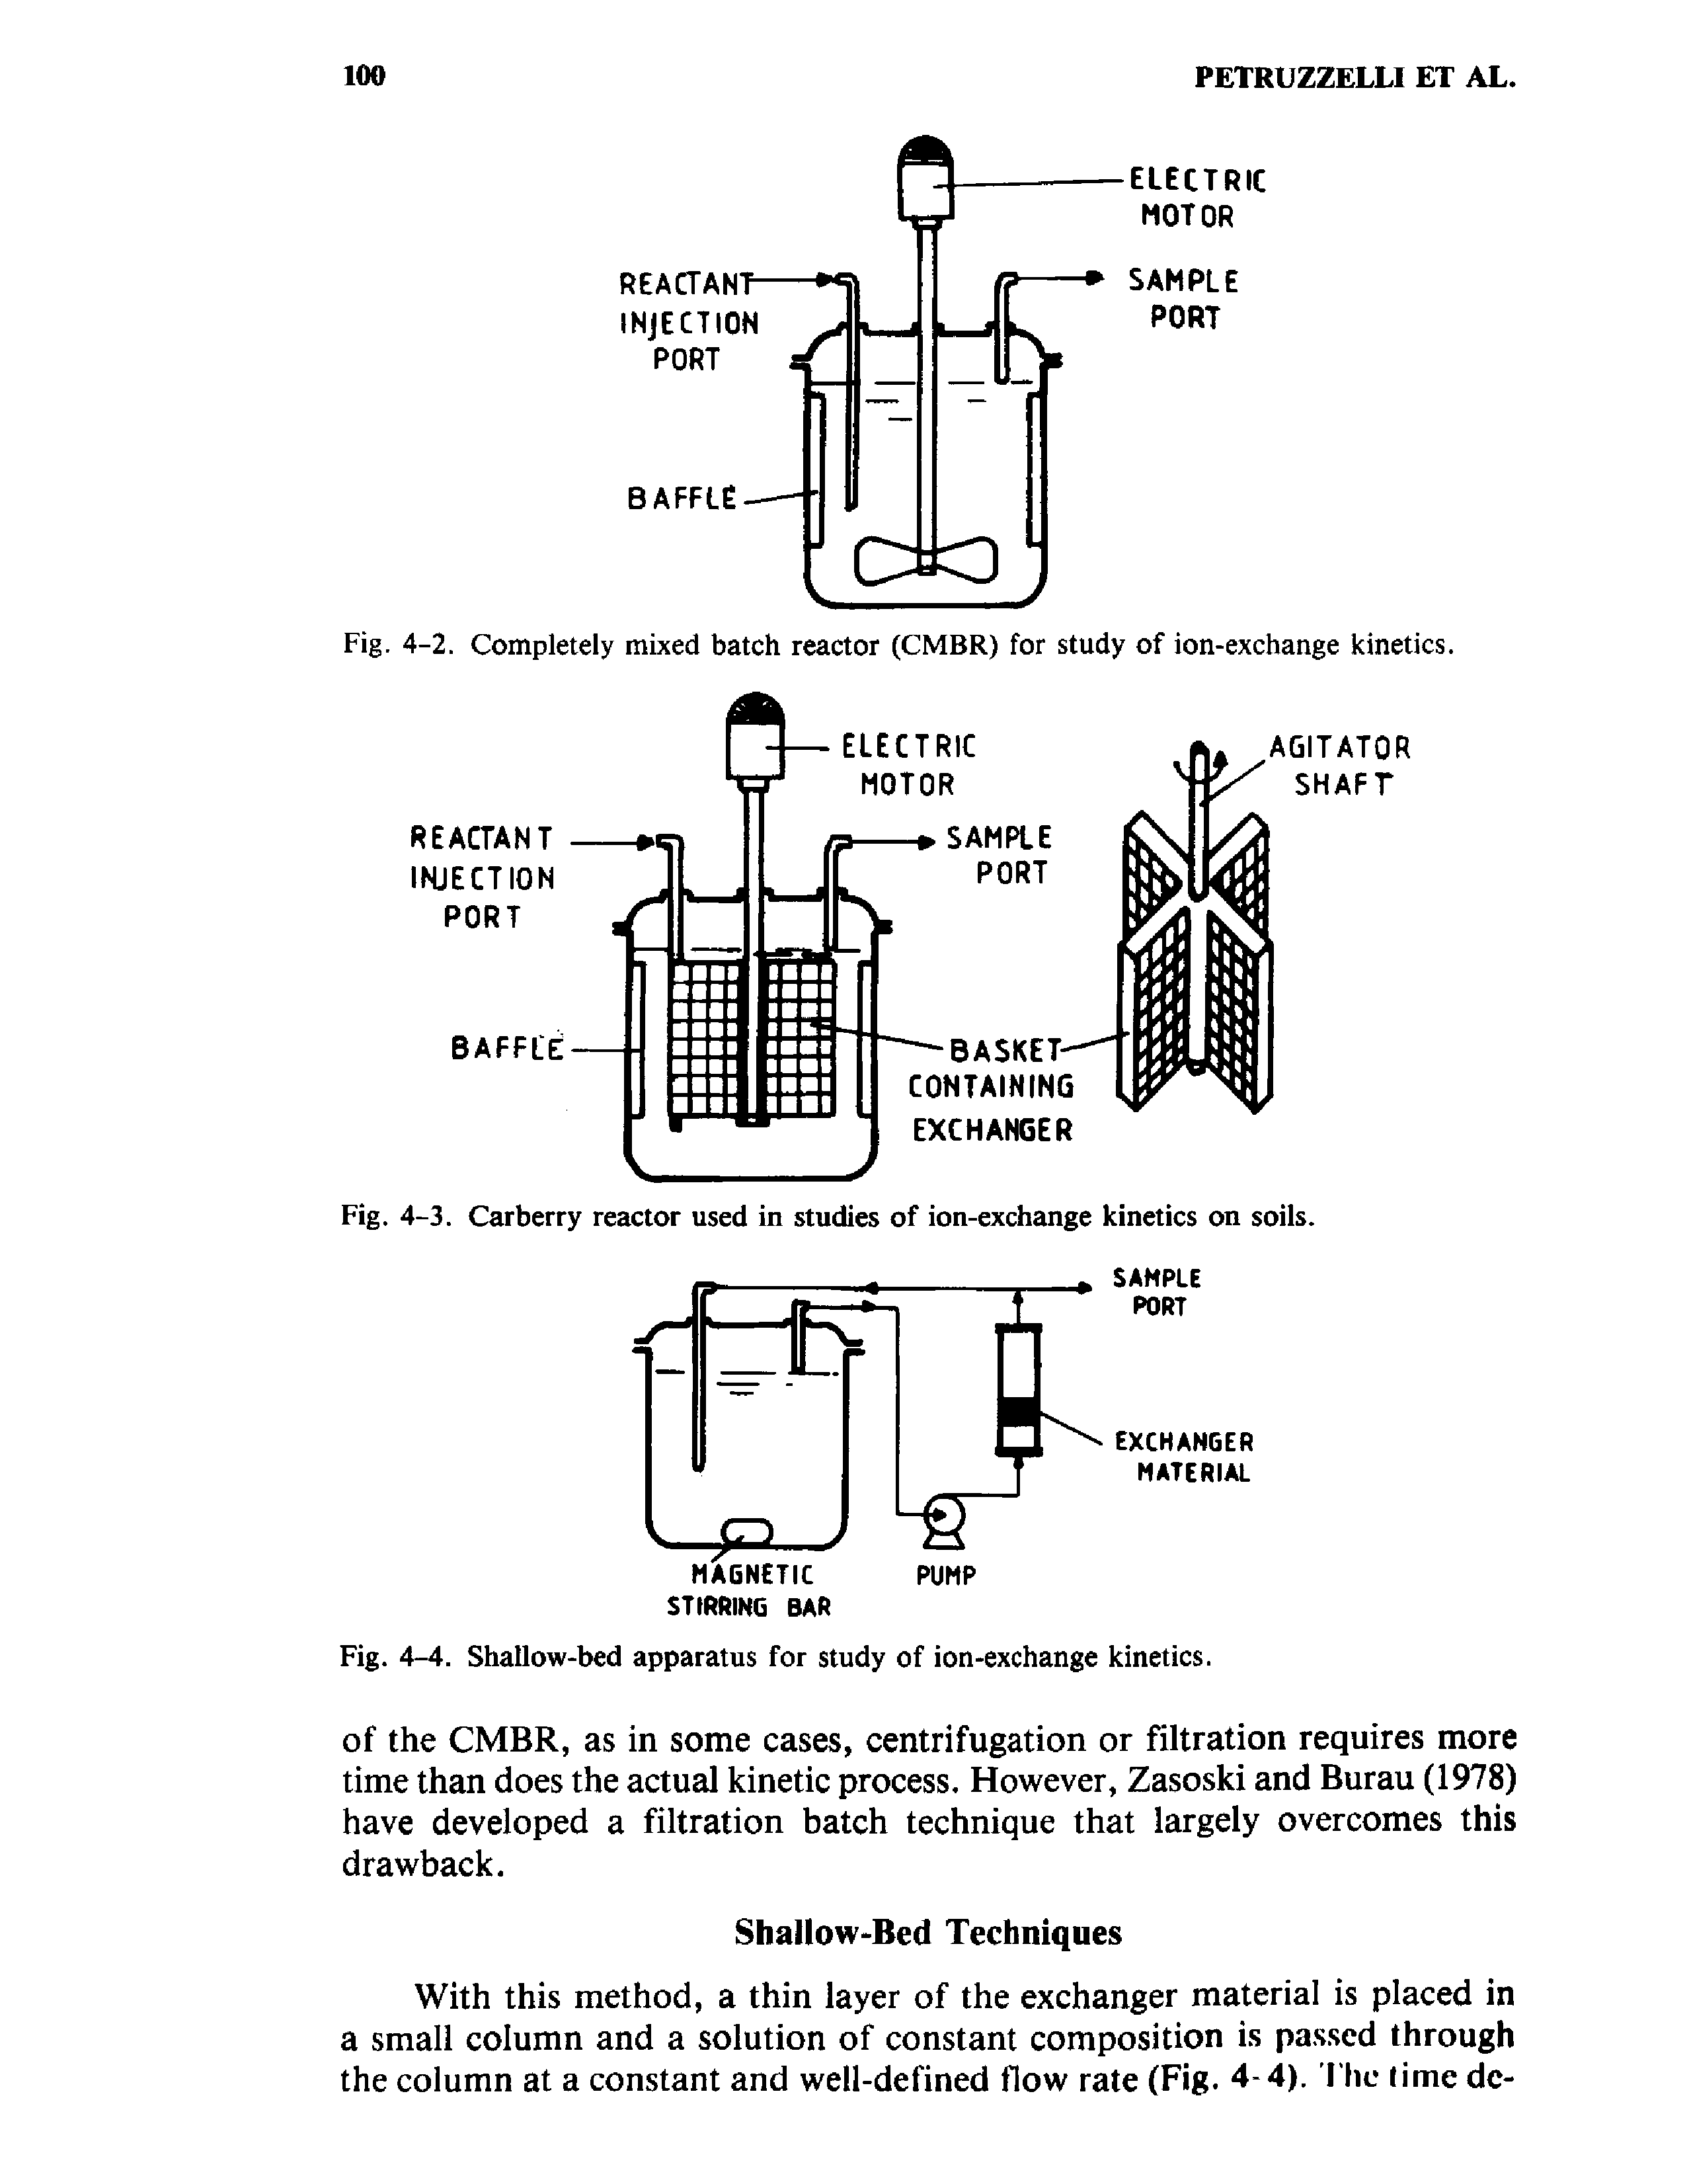 Fig. 4-3. Carberry reactor used in studies of ion-exchange kinetics on soils.